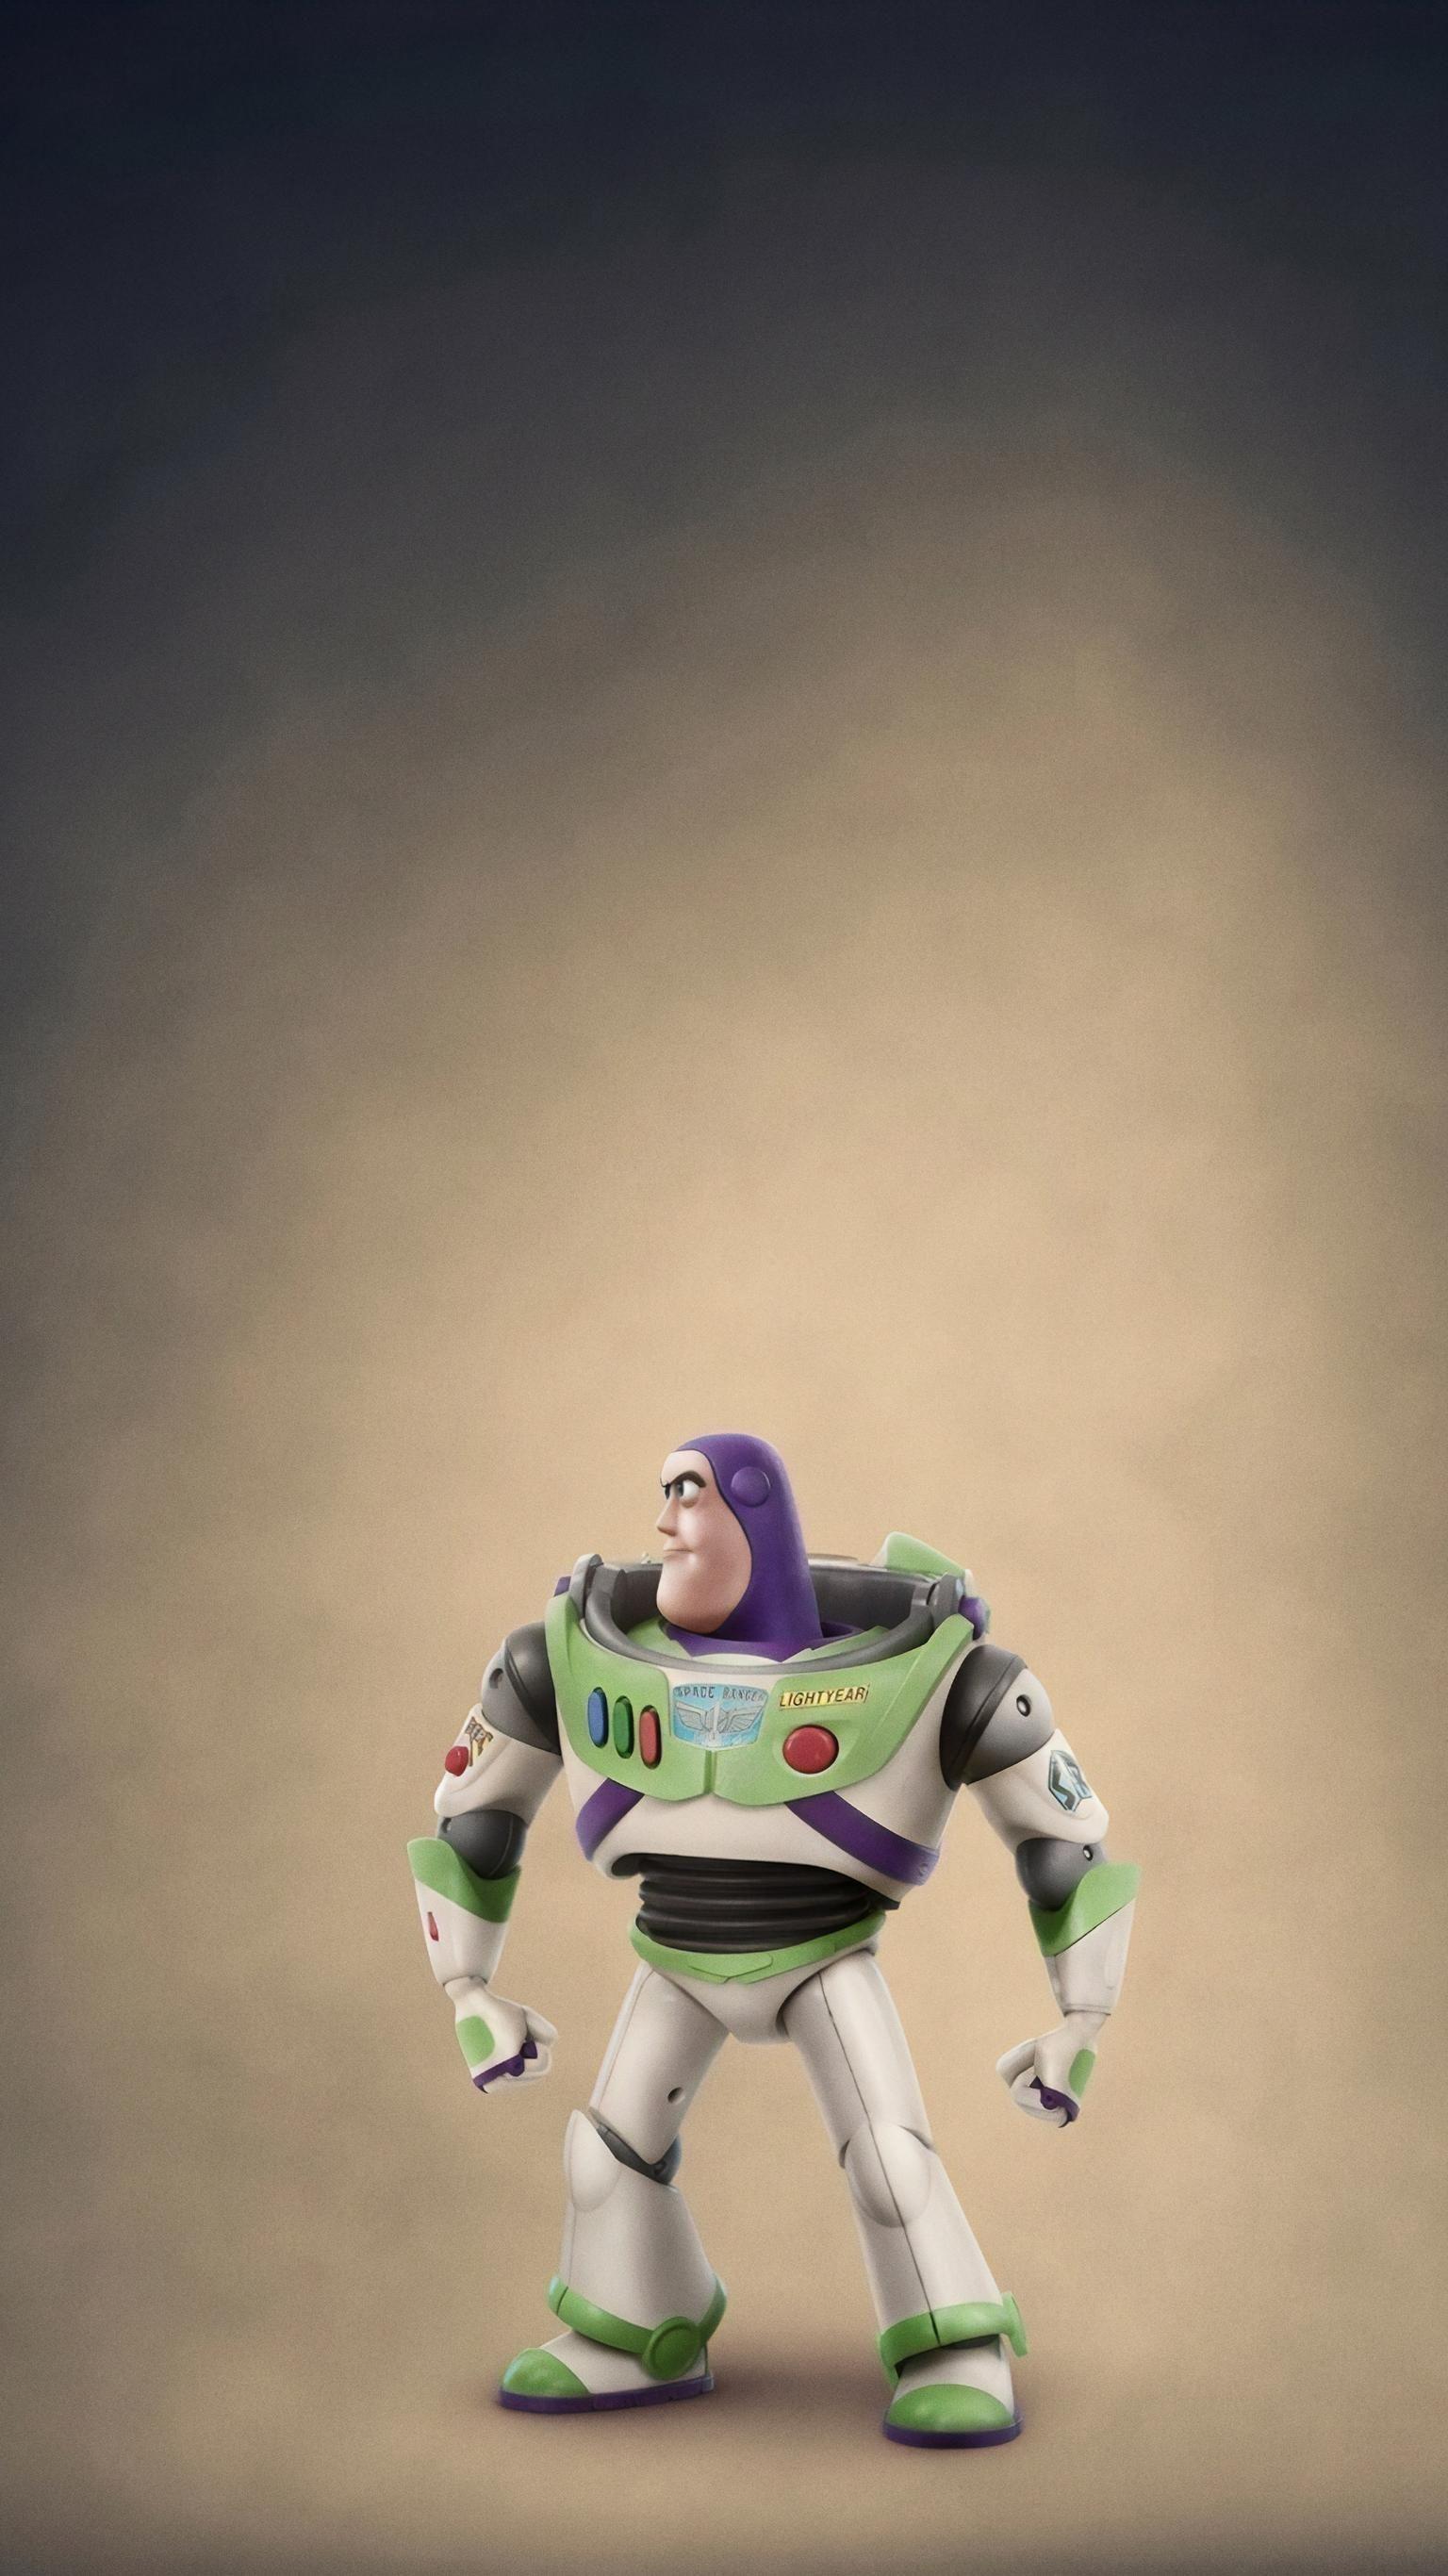 Toy Story 4 (2019) Phone Wallpaper. I PAD. Movie posters